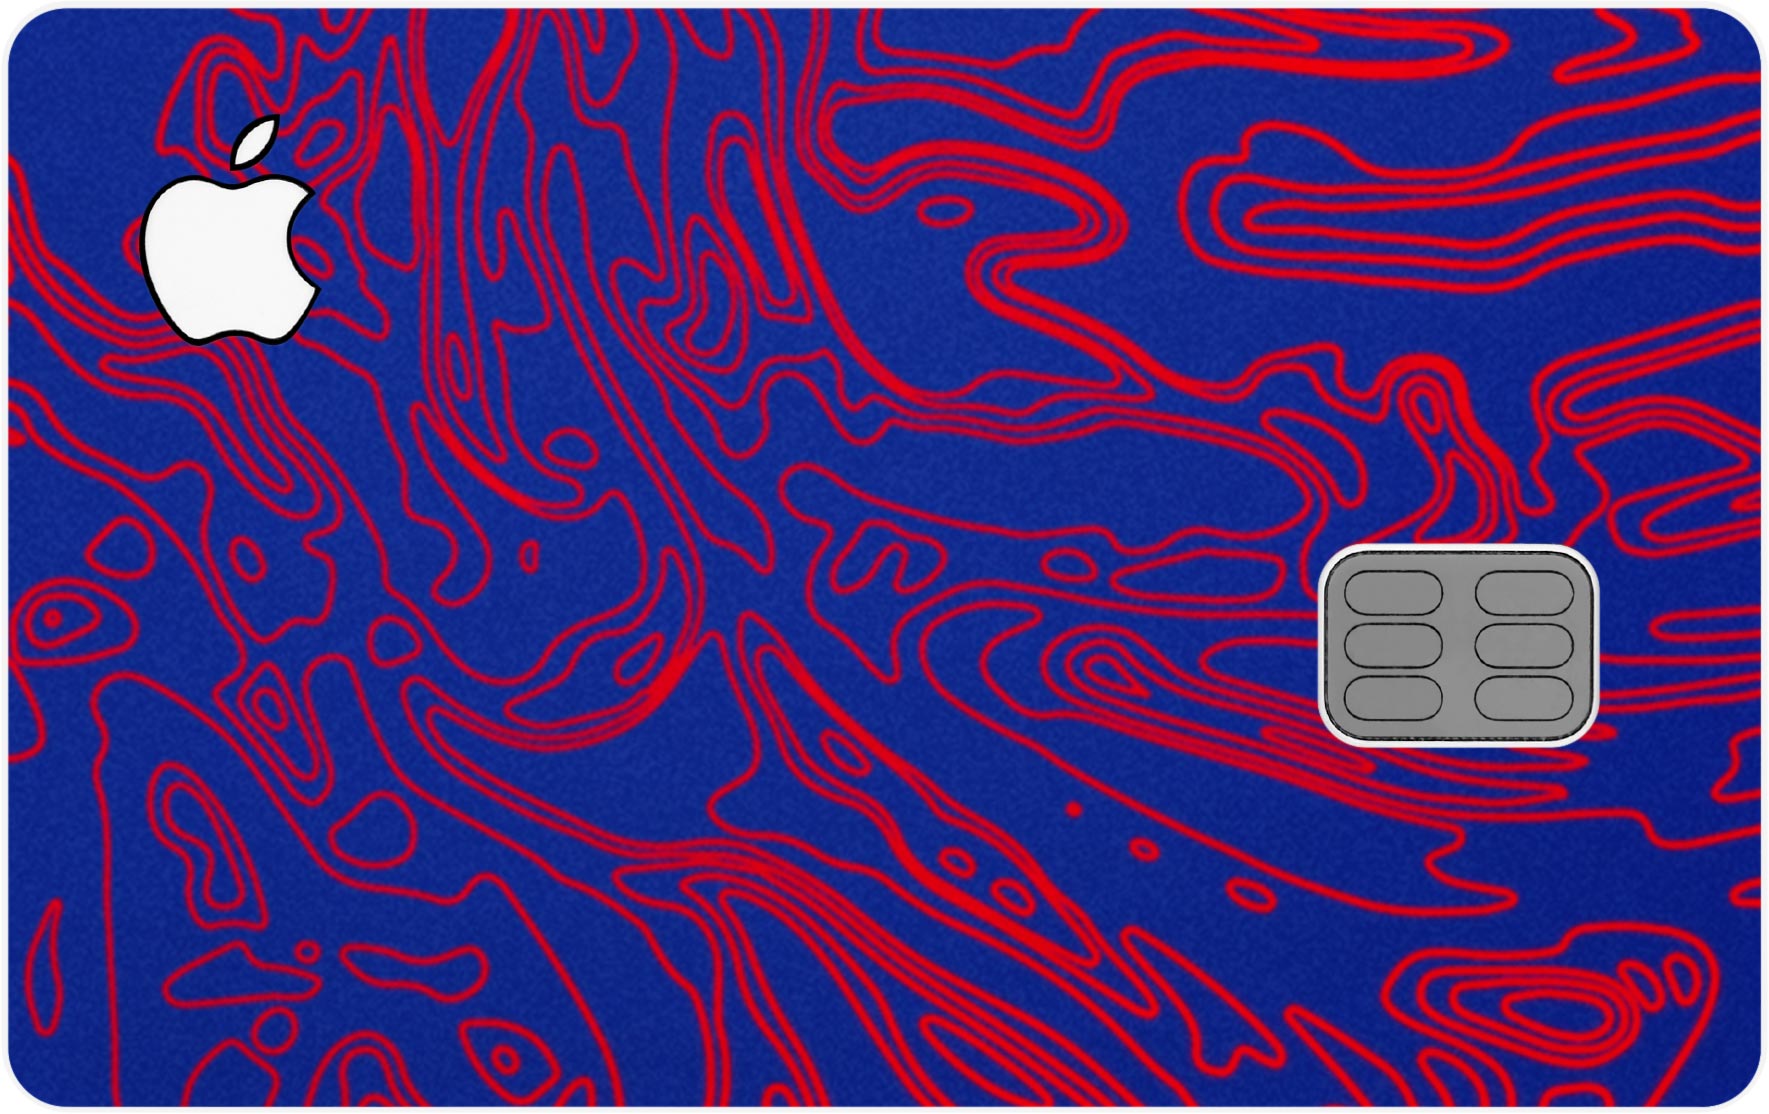 Credit / Debit card Skins, Decals, Wraps & Covers